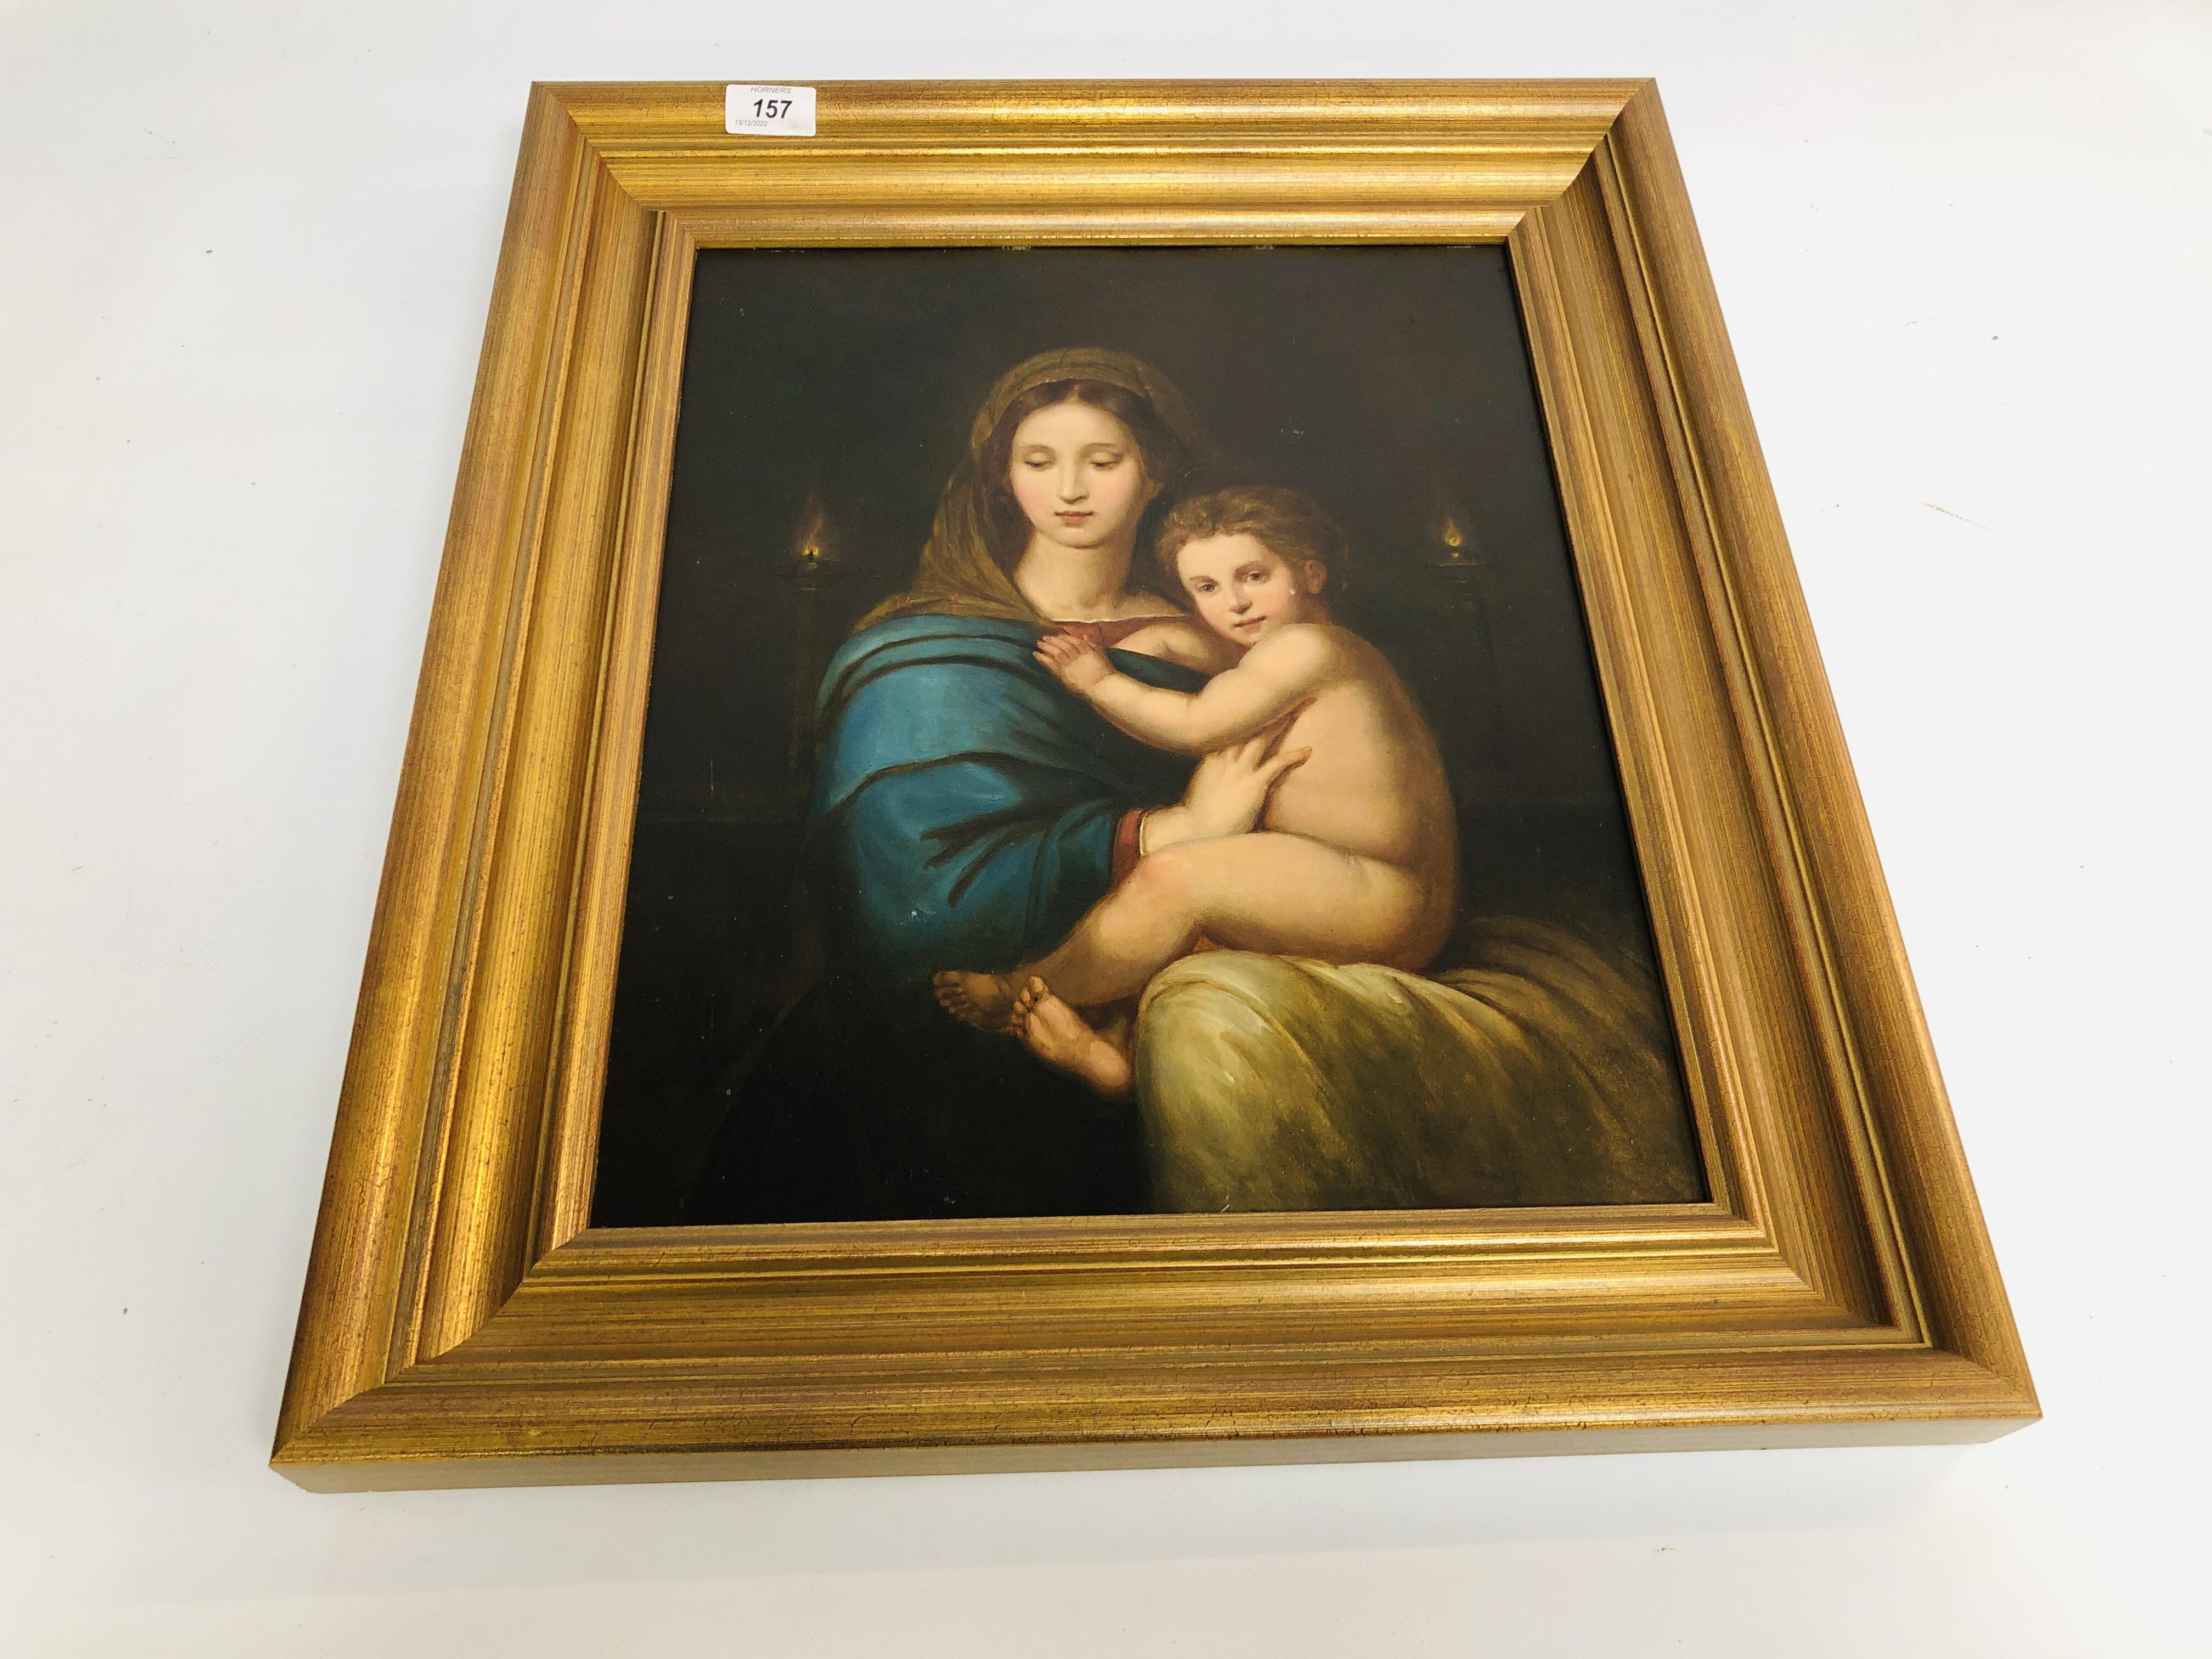 C19th SCHOOL: VIRGIN AND CHILD AFTER C17th ITALIAN OIL ON BOARD 43 X 35CM.